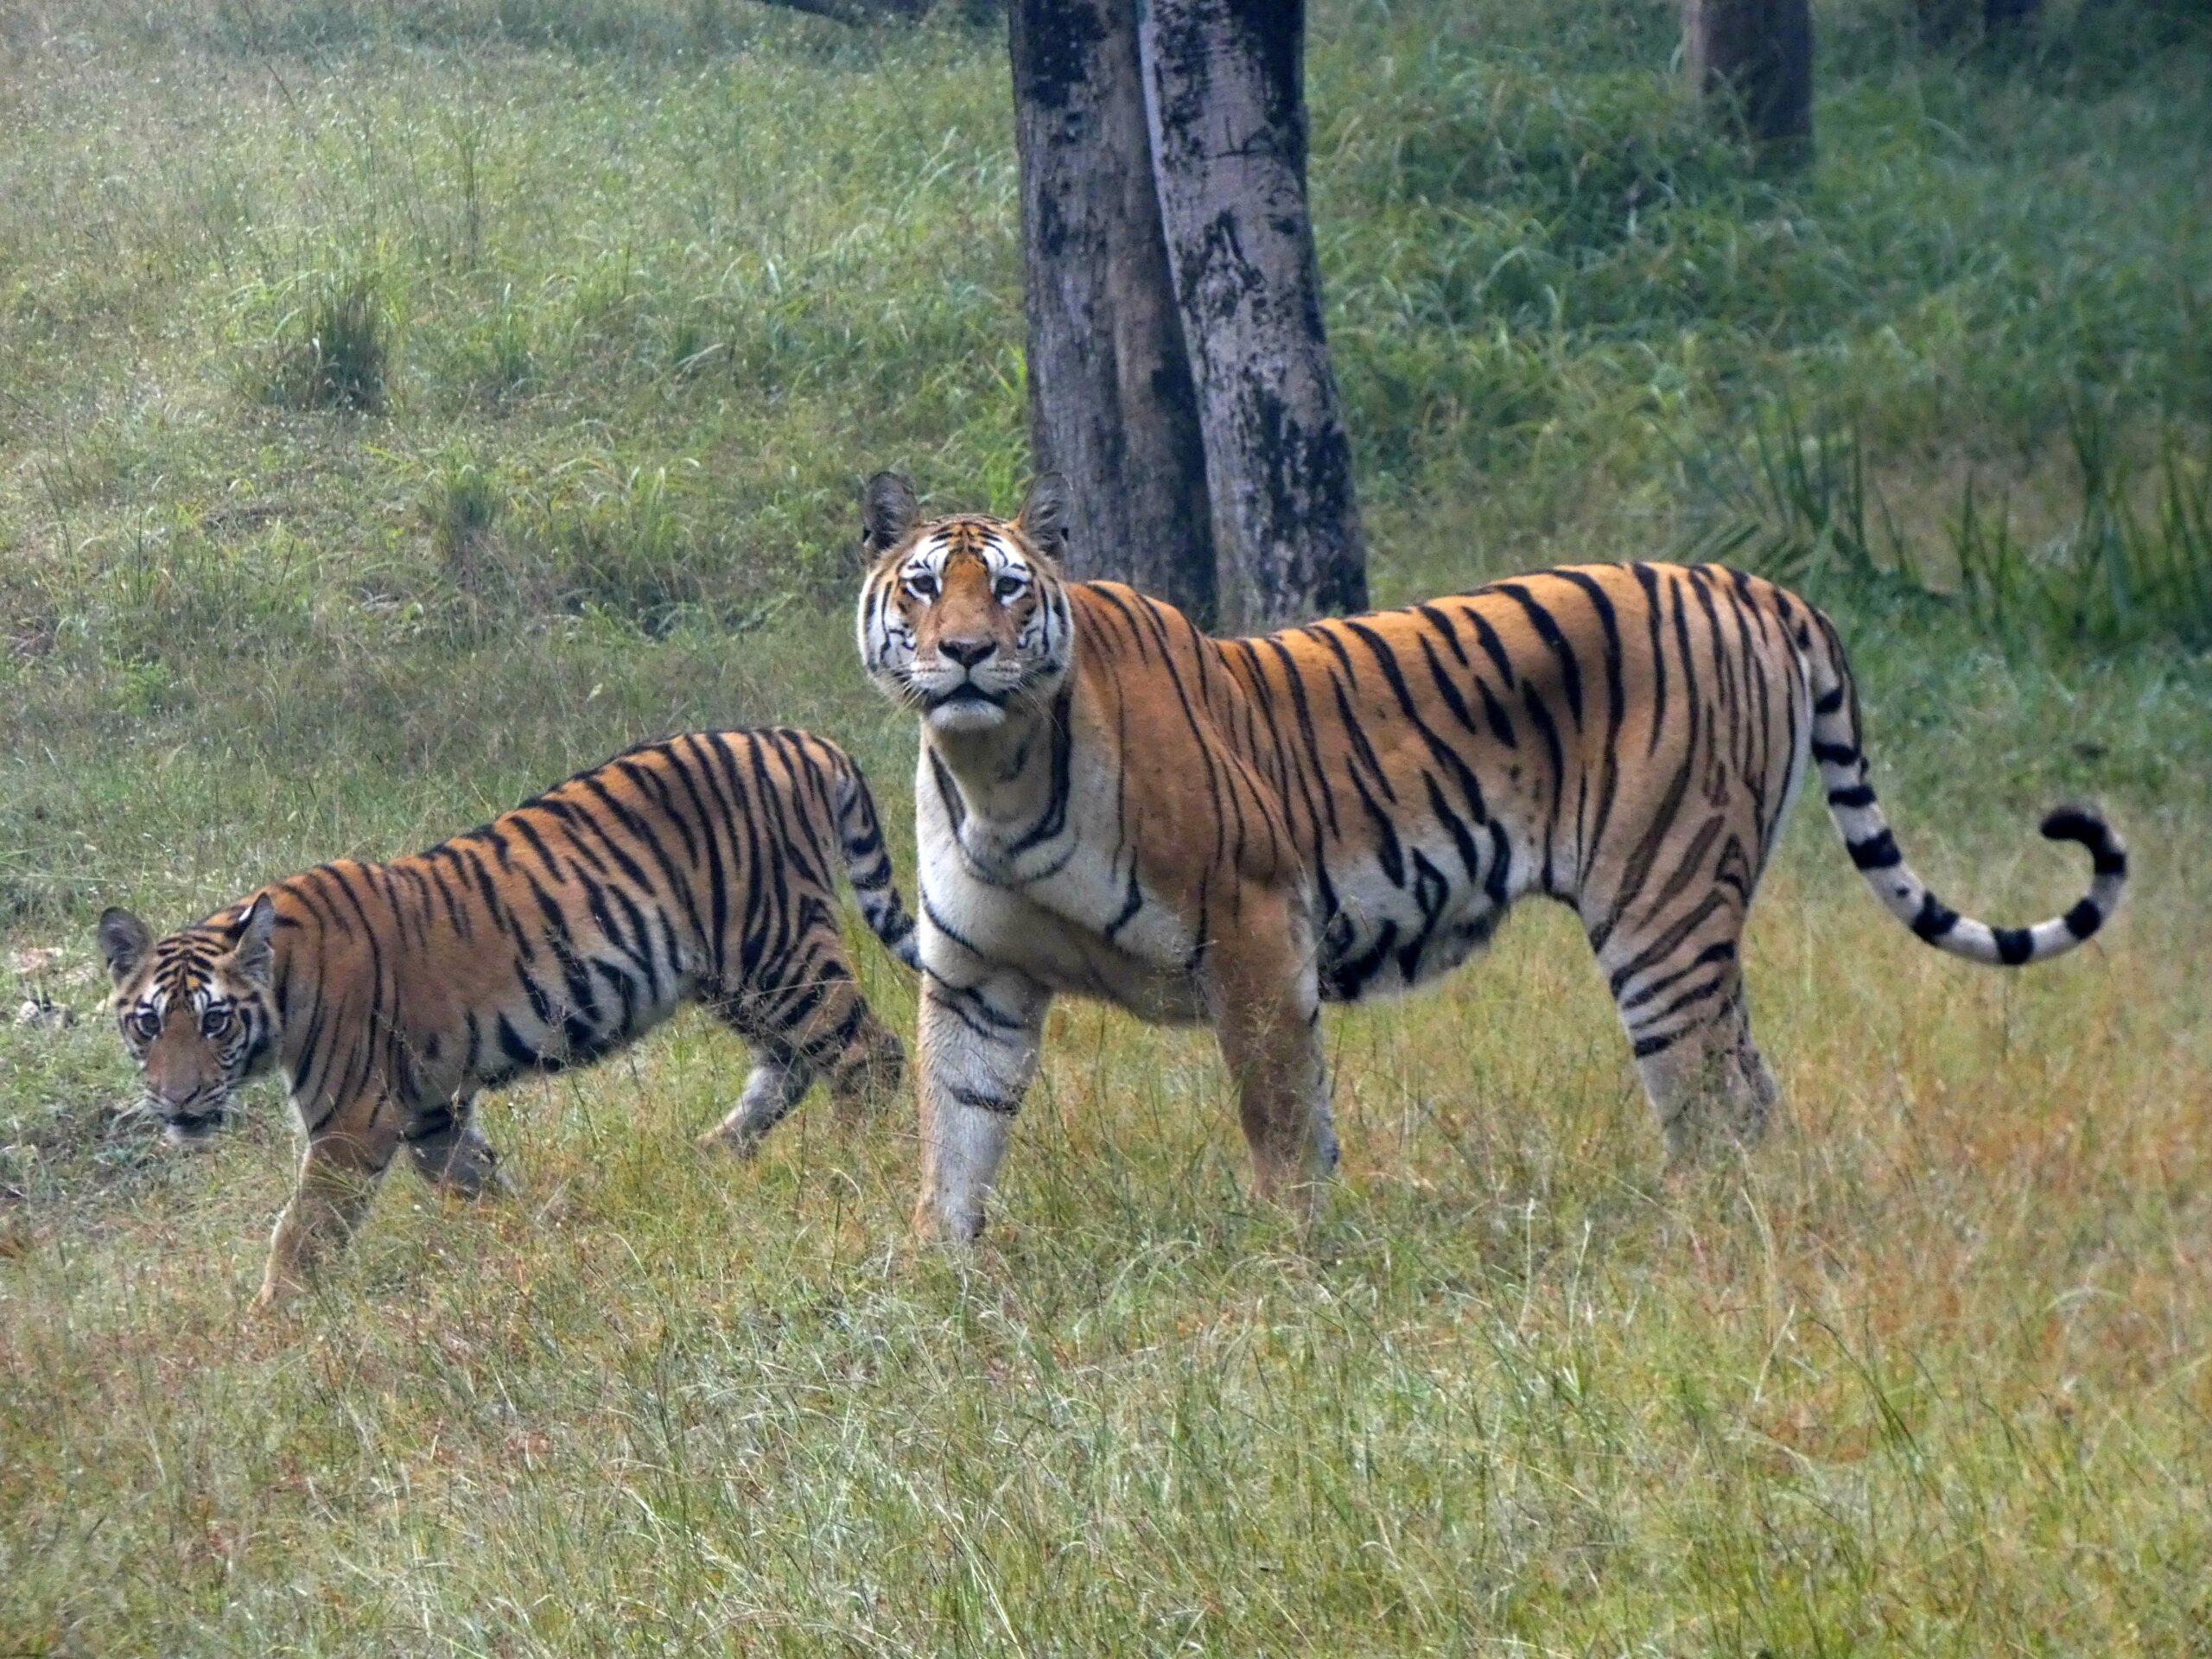 Bengal Tigers bounce back rapidly in Nepal